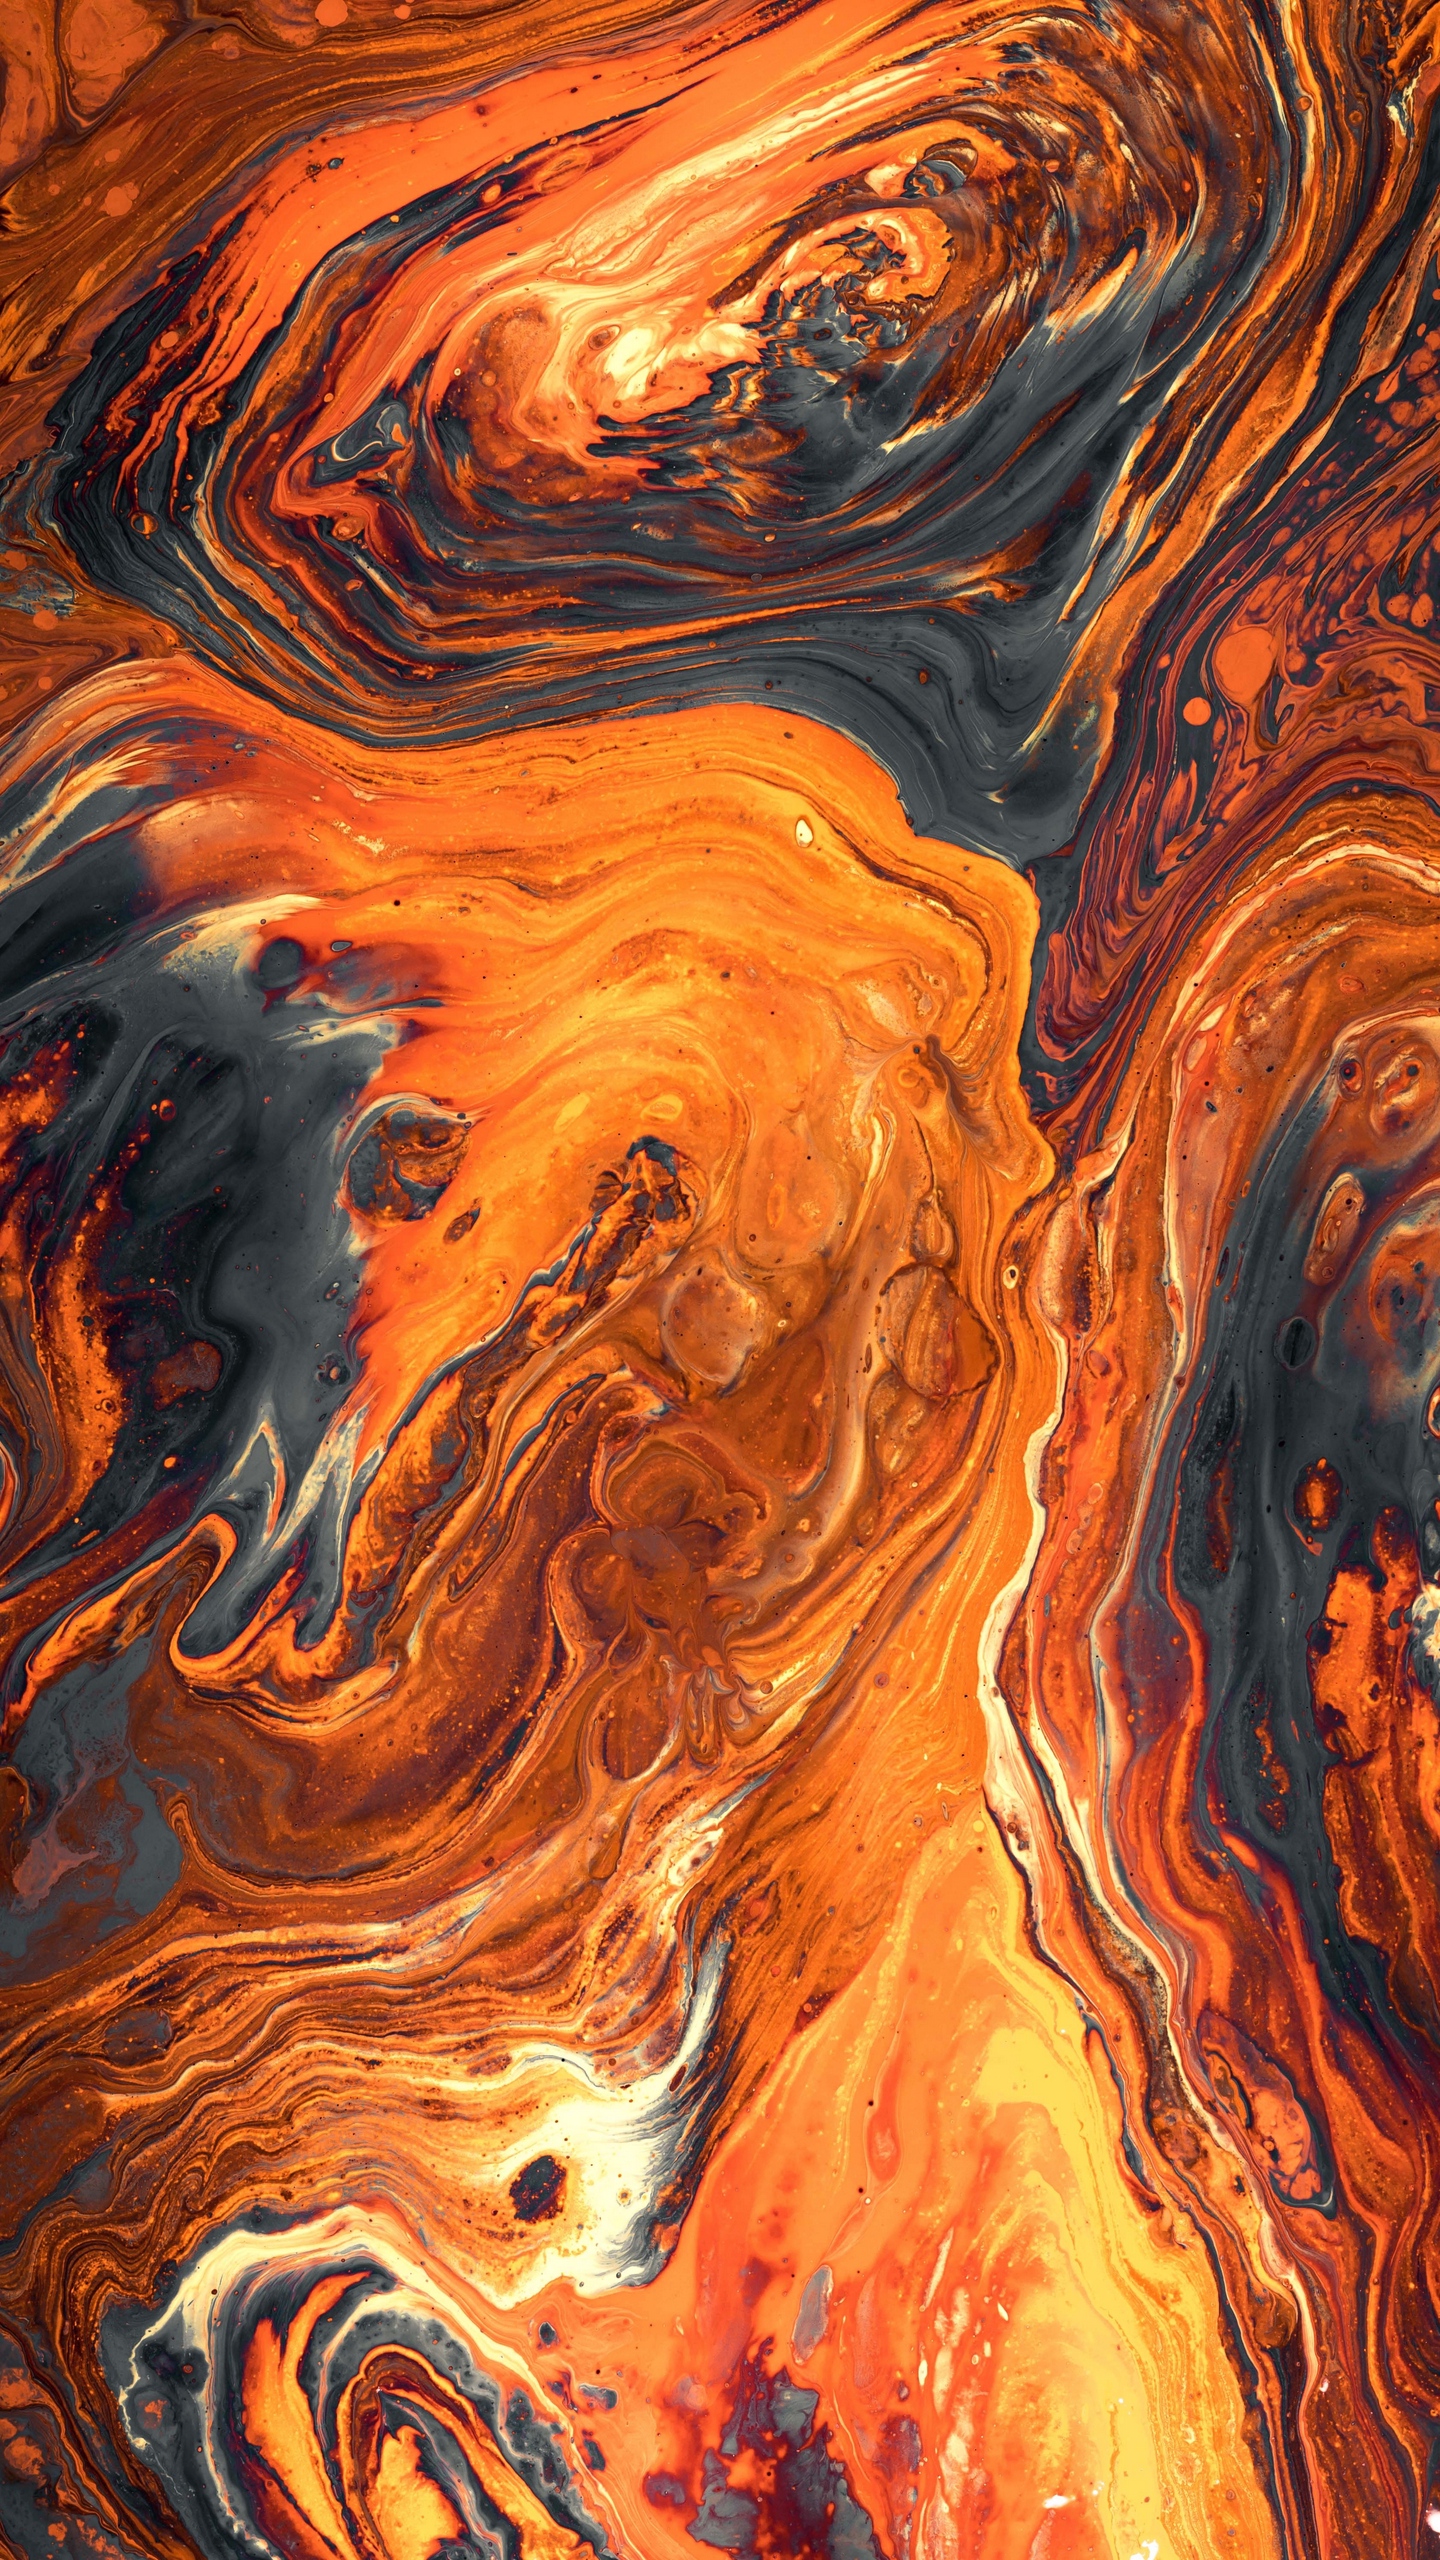 Wallpaper Paint, Stains, Orange, Spots, Abstraction, - Orange Galaxy Background Hd - HD Wallpaper 